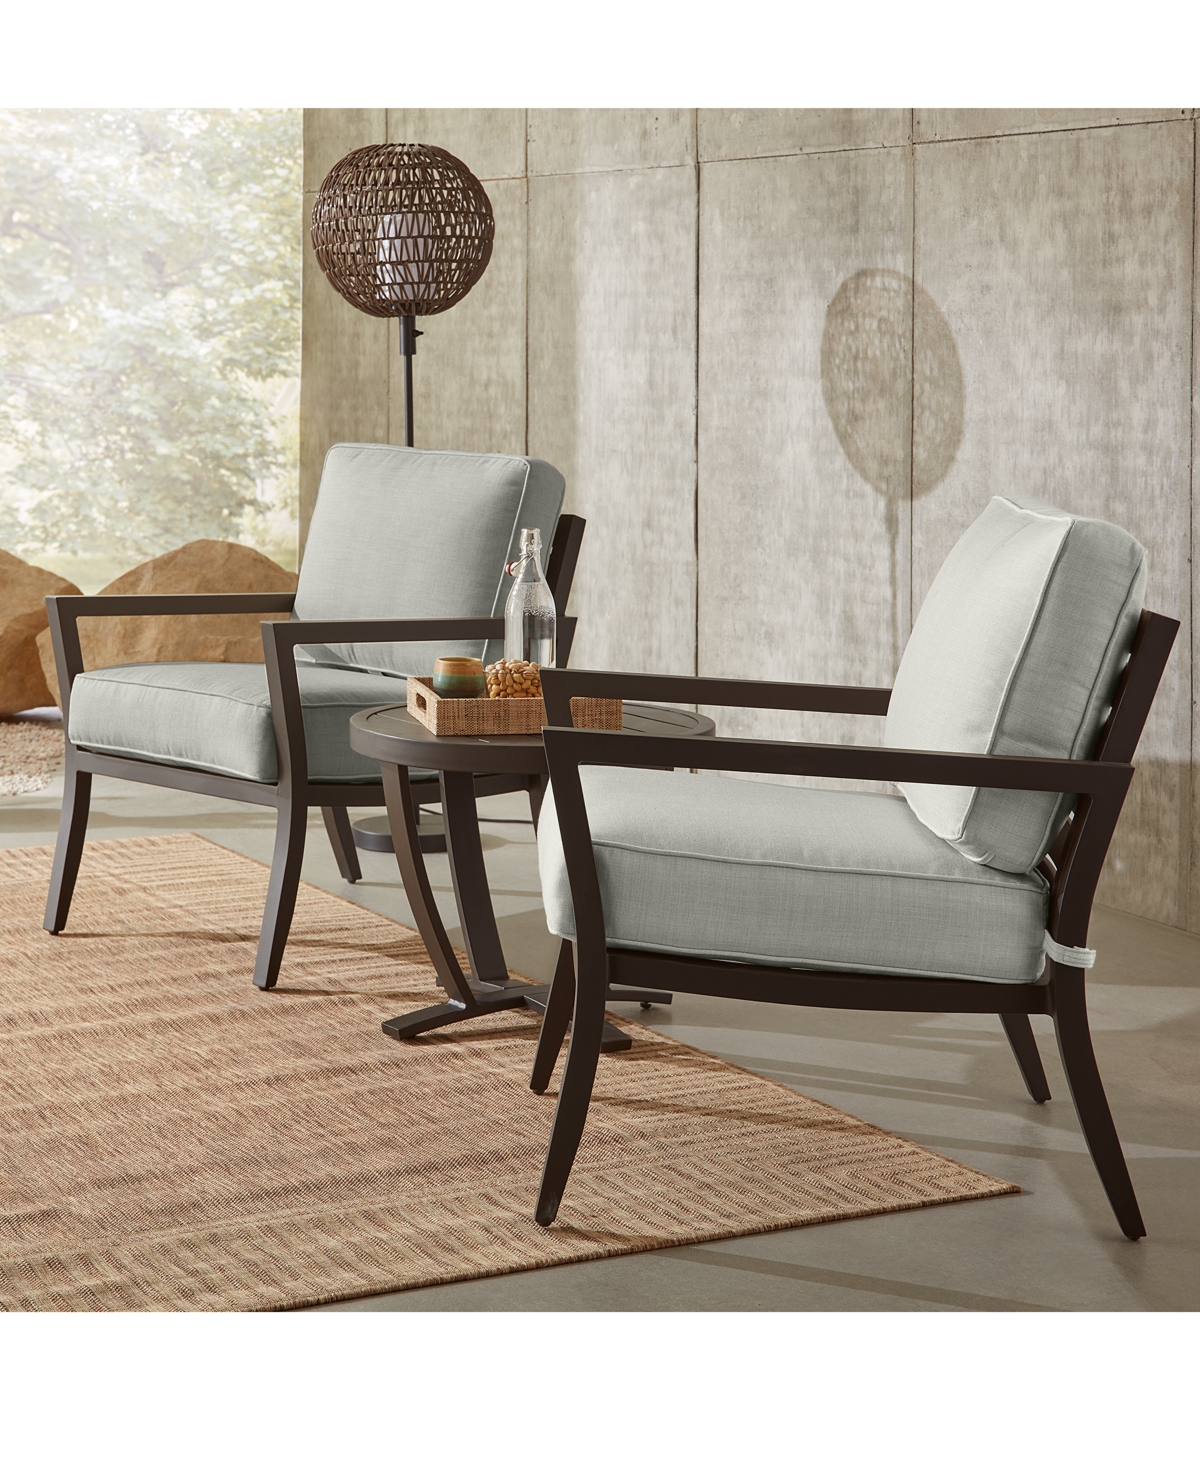 Shop Agio Astaire Outdoor 3-pc Lounge Chair Set (2 Lounge Chairs + 1 End Table) In Straw Natural